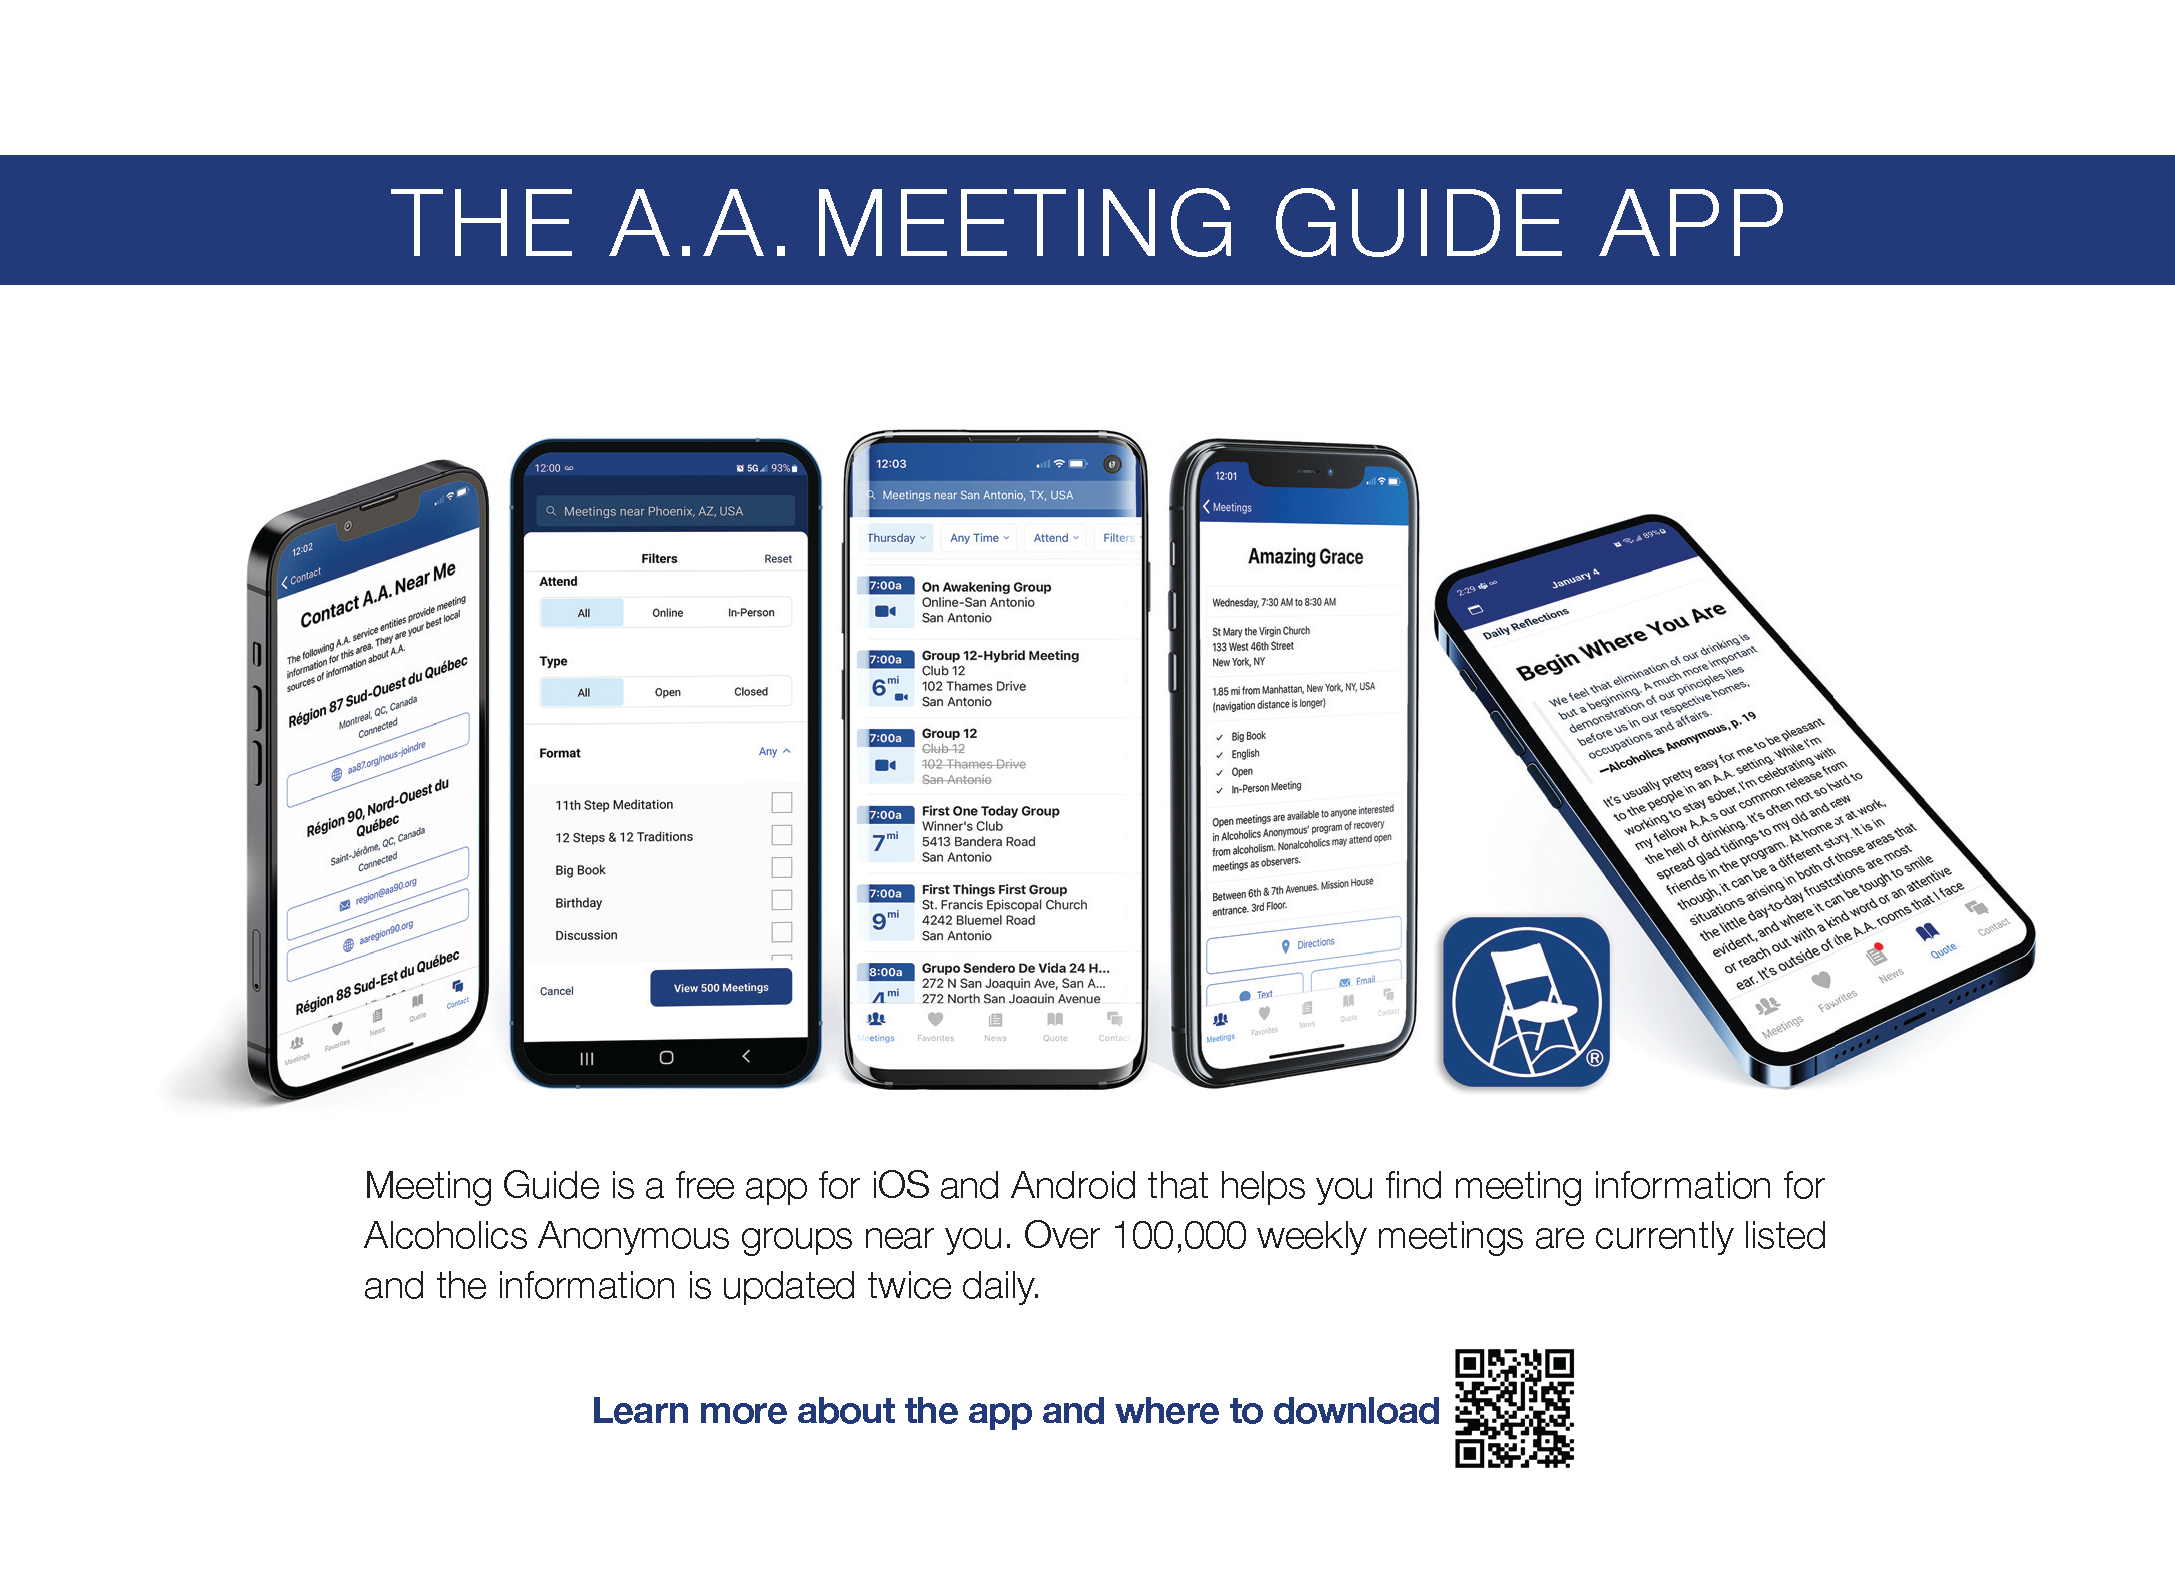 P.I. Service Card: Meeting Guide App